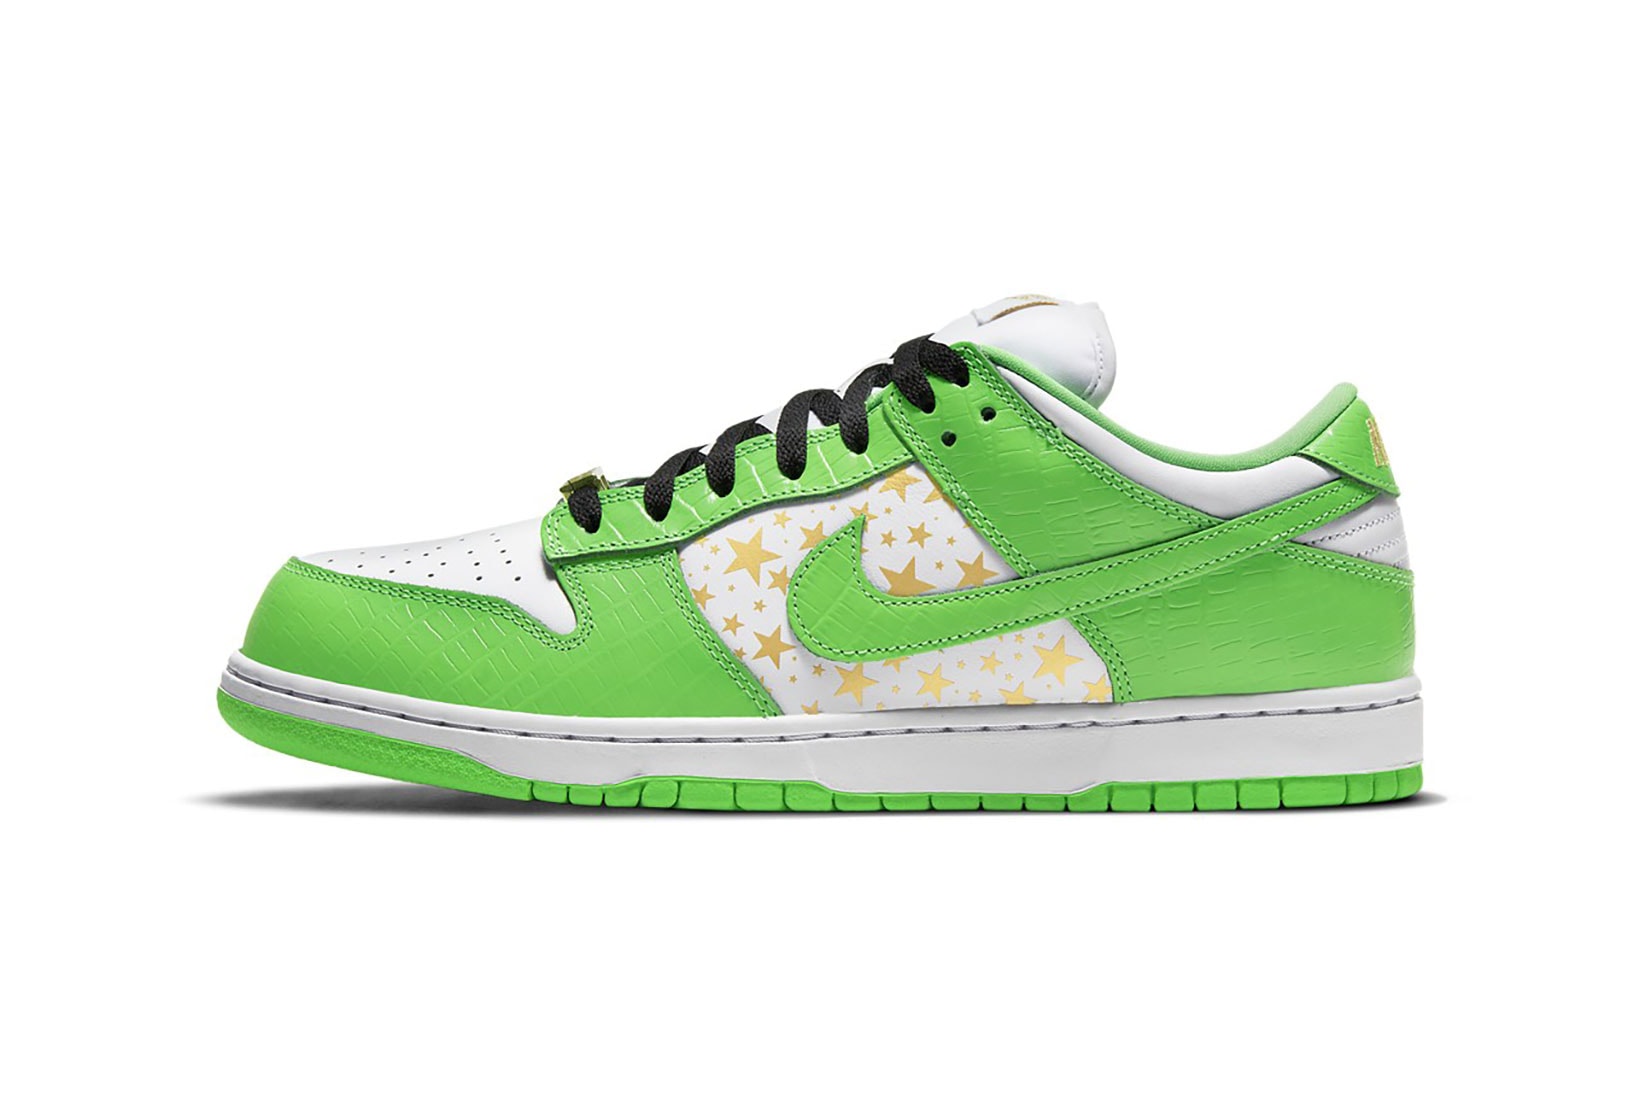 supreme nike sb dunk low collaboration sneakers mean green white black stars colorway sneakerhead shoes footwear lateral